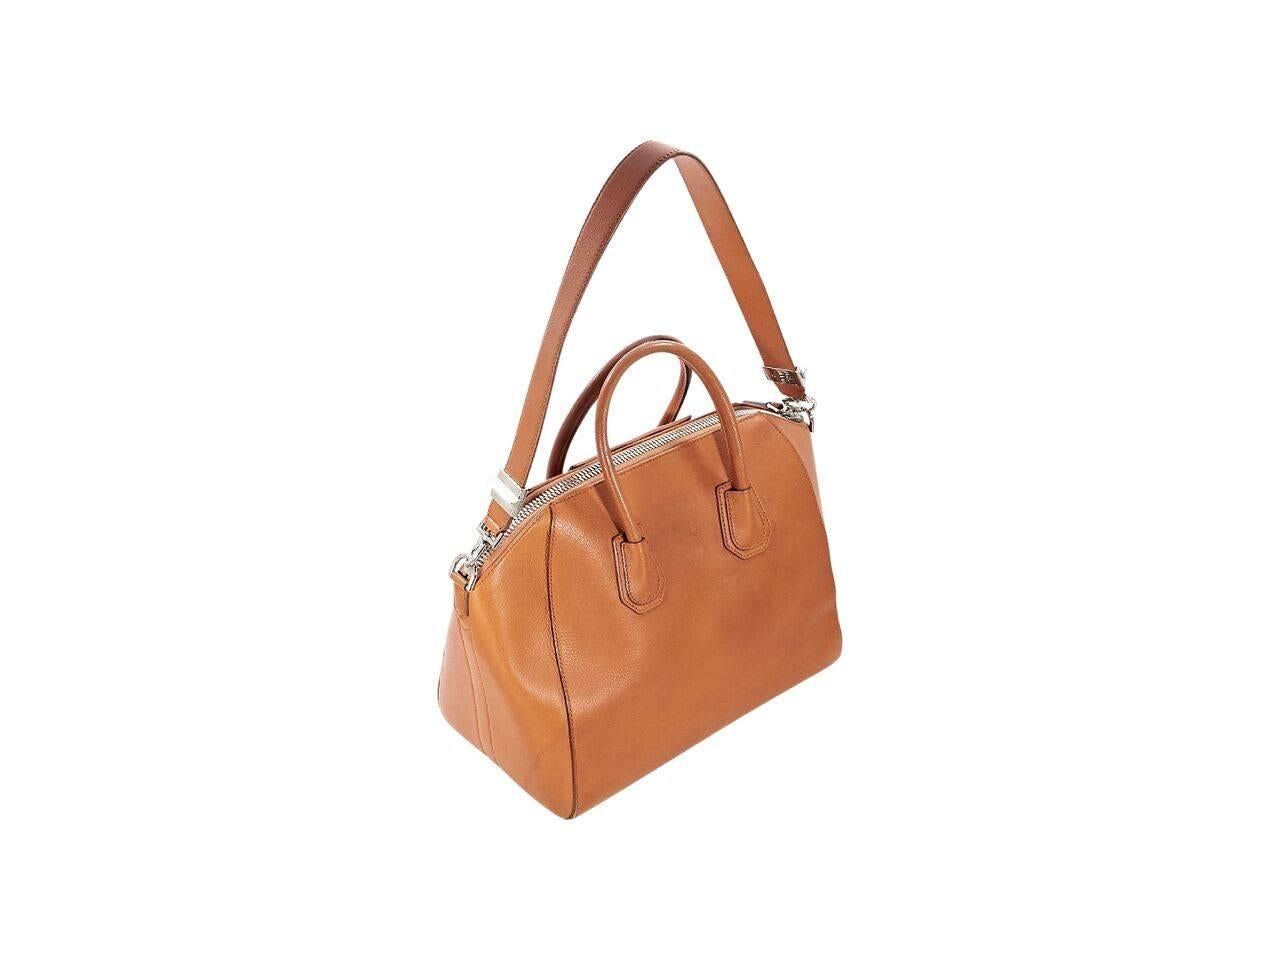 Product details:  Tan medium Antigona leather satchel by Givenchy.  Dual carry handles.  Detachable shoulder strap.  Top zip closure.  Lined interior with inner zip pocket.  Silvertone hardware. 
Condition: Pre-owned. Very good.
Est. Retail $